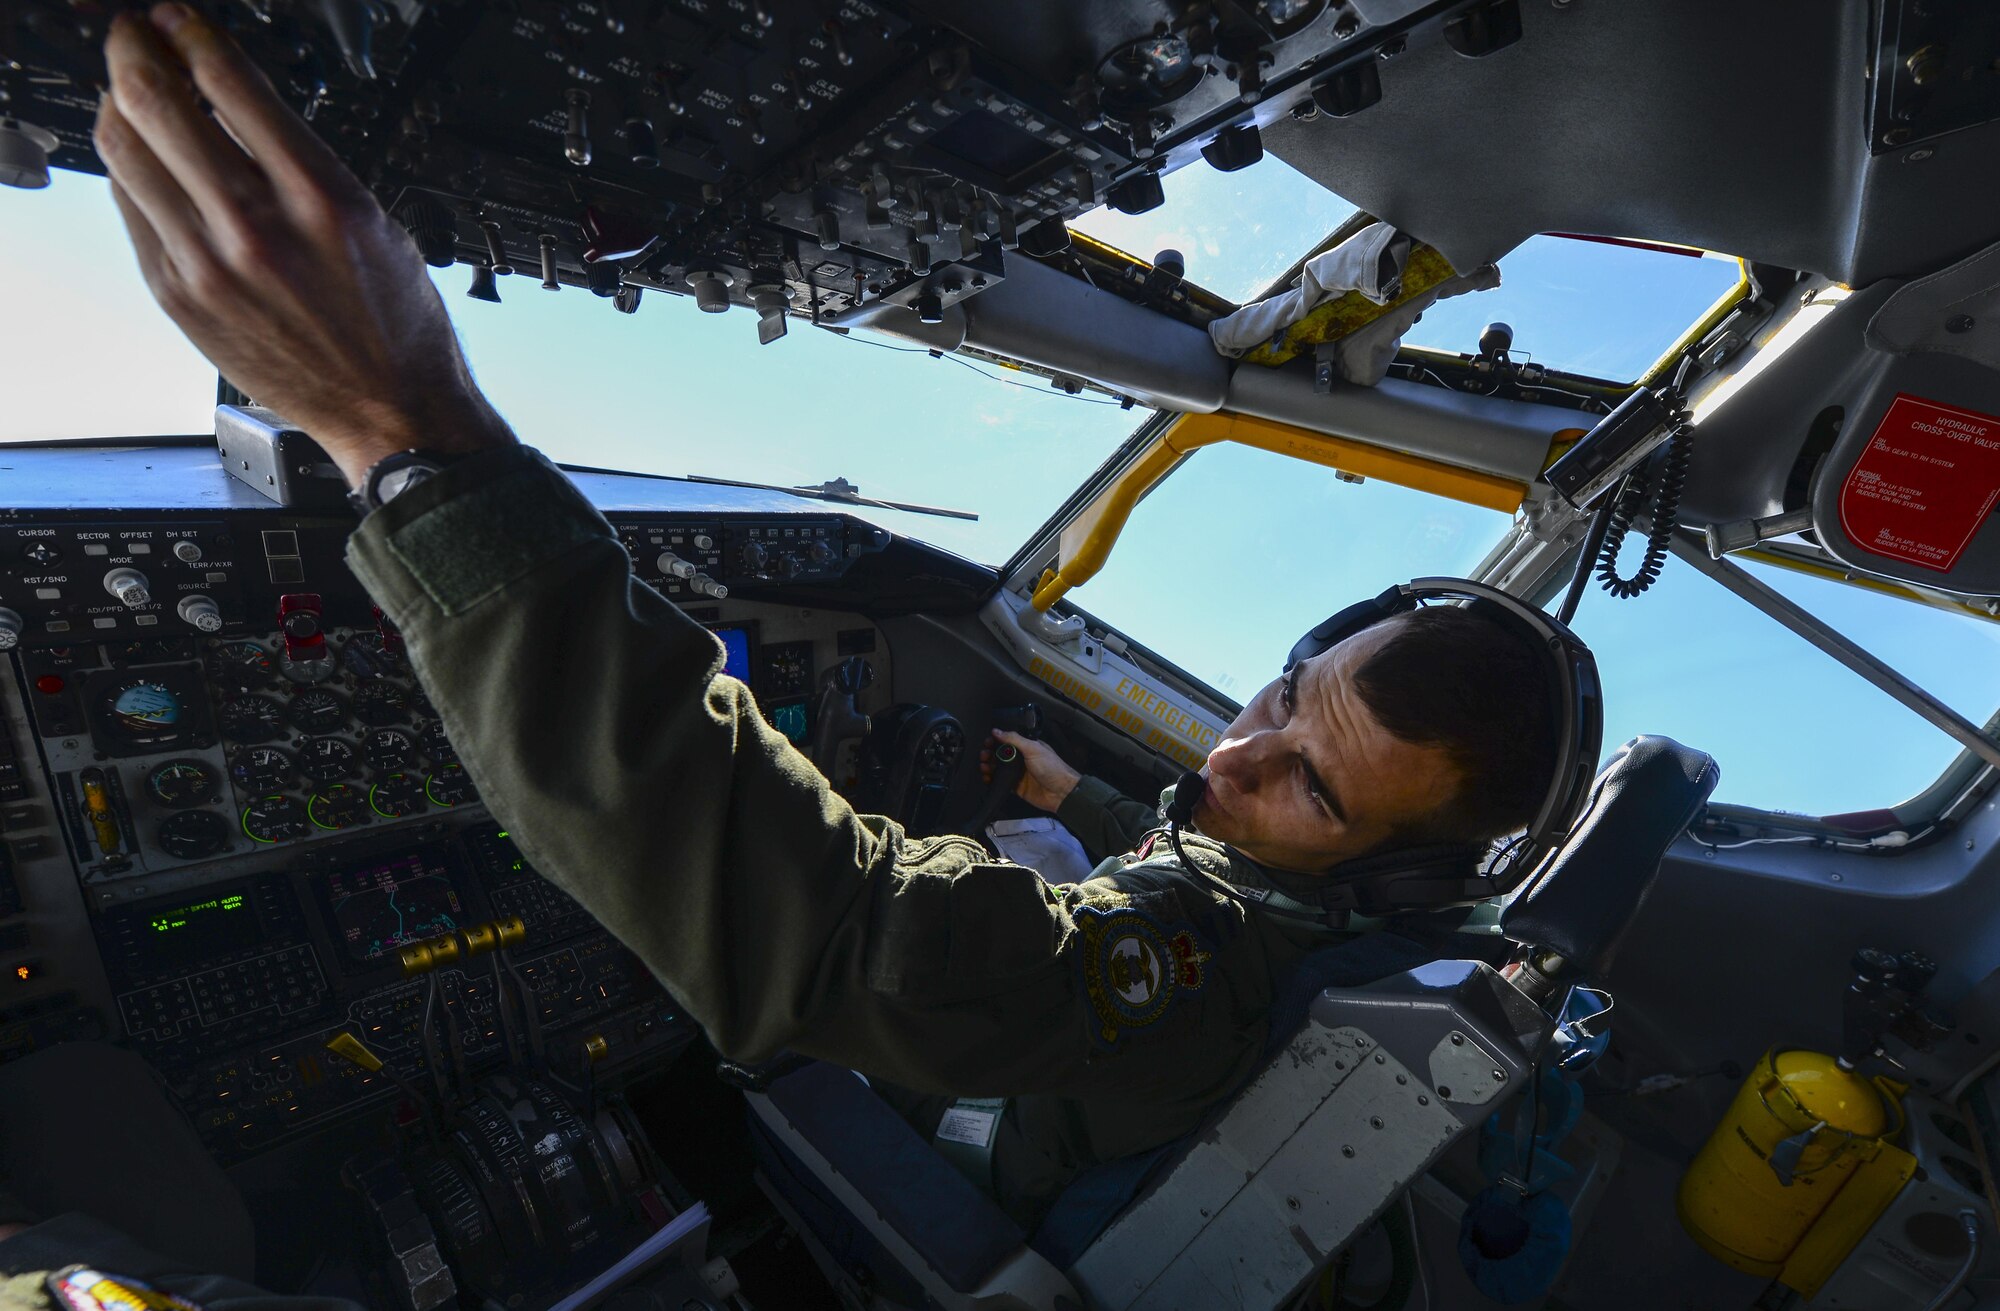 U.S. Air Force Capt. Robert Allen, 351st Air Refueling Squadron instructor pilot, flies a KC-135 Stratotanker May 3, 2017, over England. Allen was paired with two other aircrew members who both had the first name Bobby. The aircraft the crew was assigned to was given the call sign Bobby 92. (U.S. Air Force photo by Staff Sgt. Micaiah Anthony)